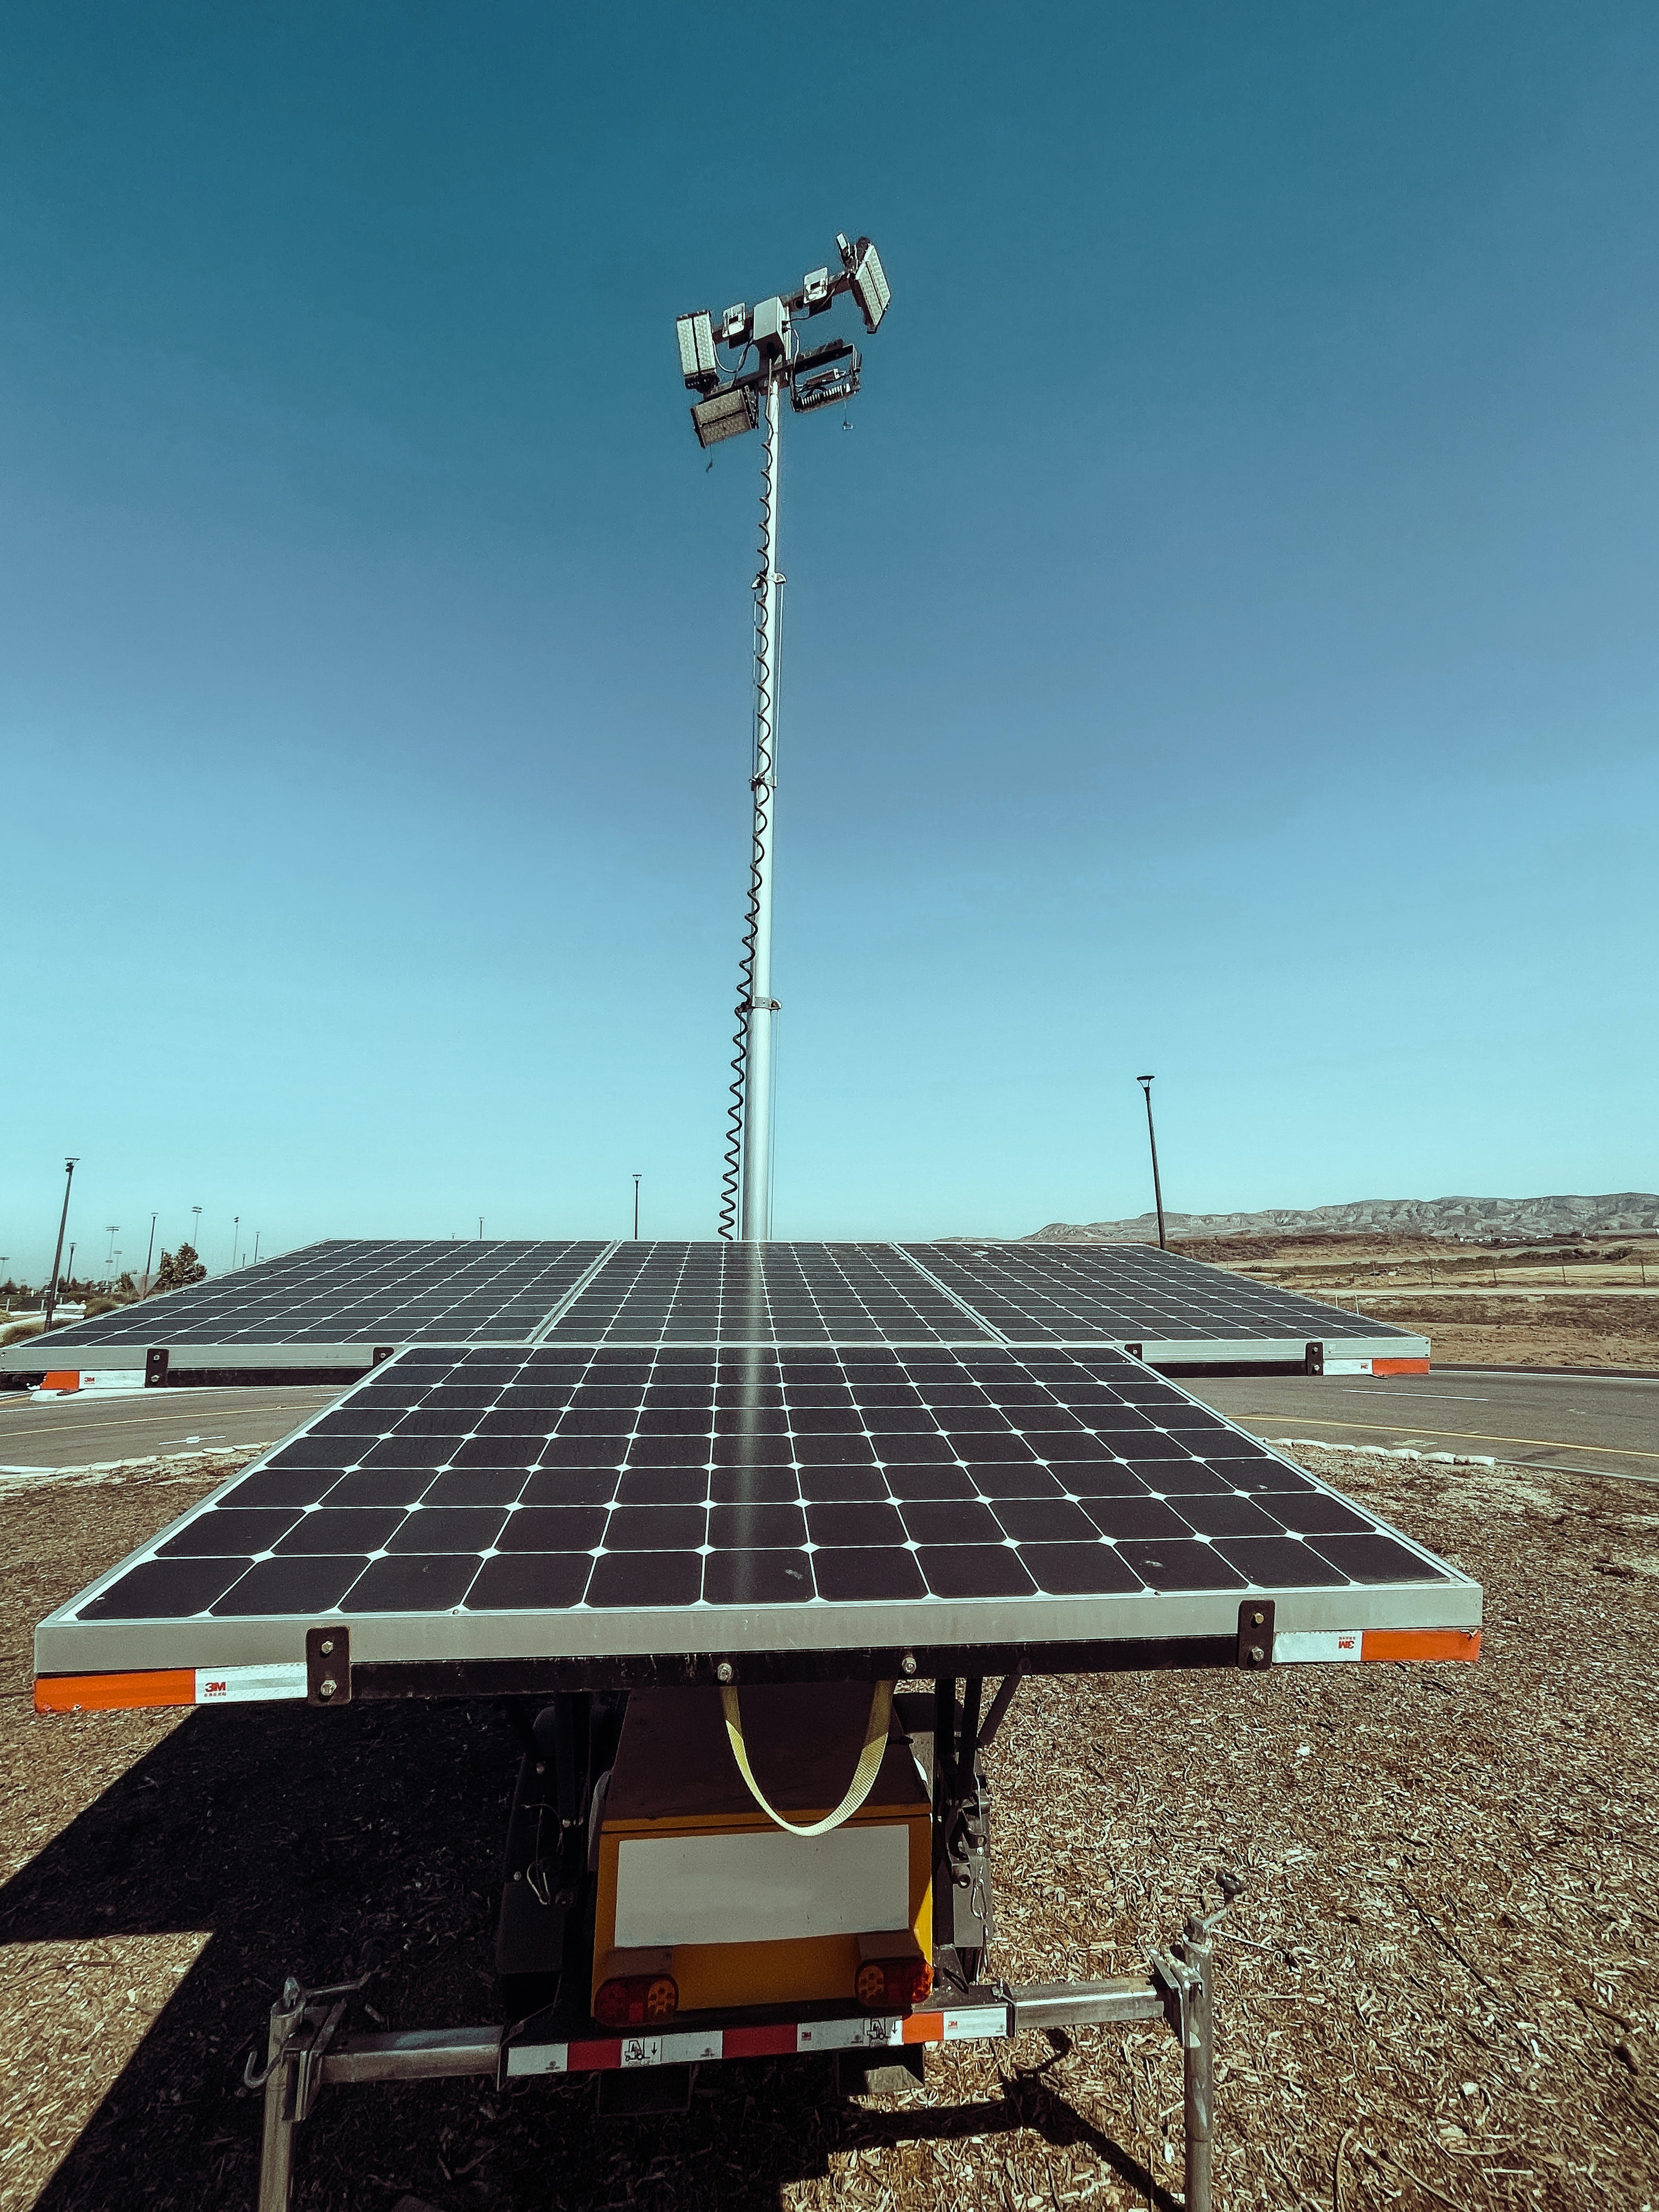 RE Atlas Can Provide Pre-feasibility Analysis for Setting up Solar Plants to Make OSOWOG a Reality